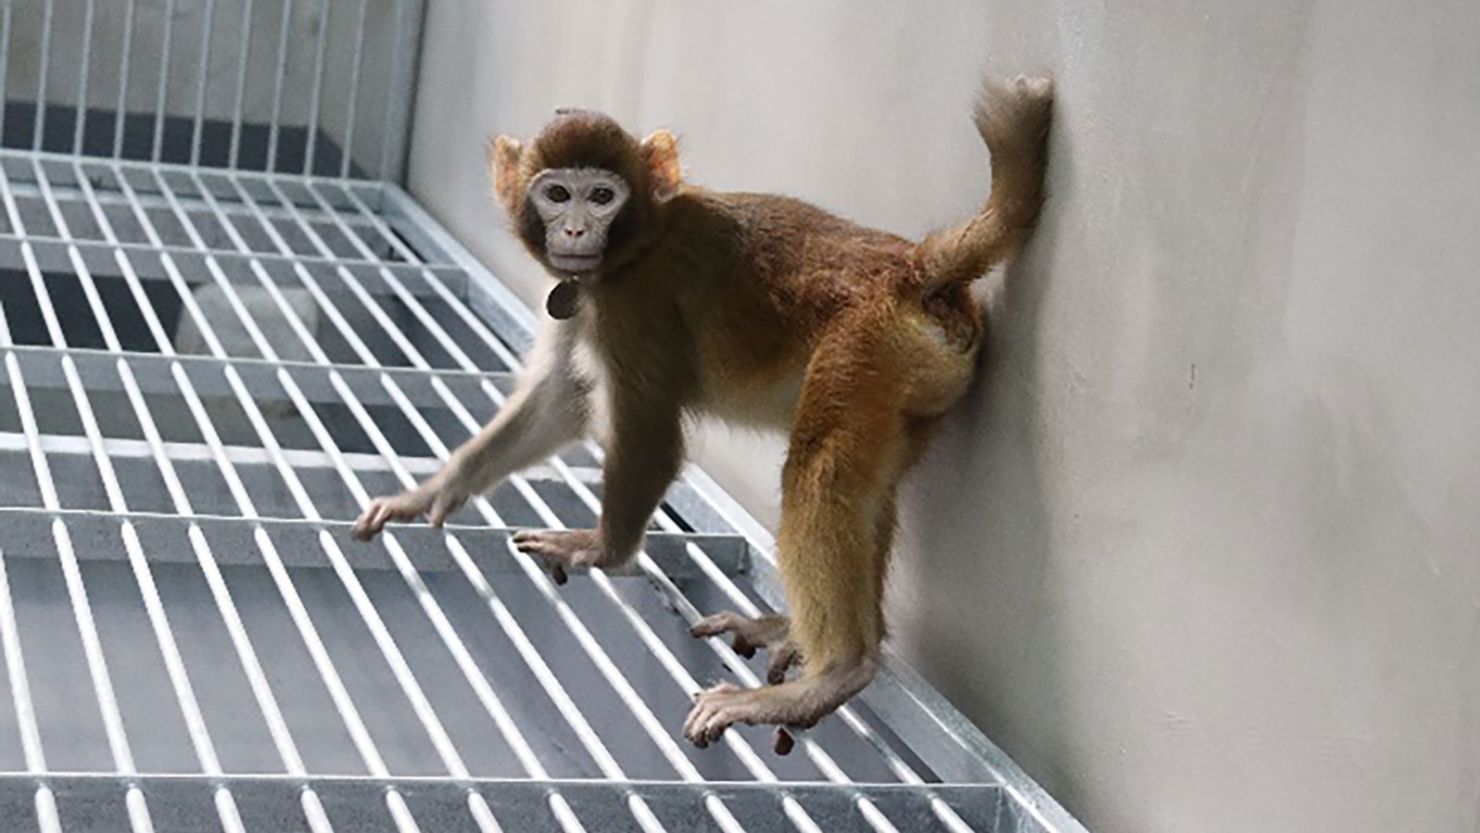 The cloned rhesus monkey was named Retro is doing well, according to the research team.